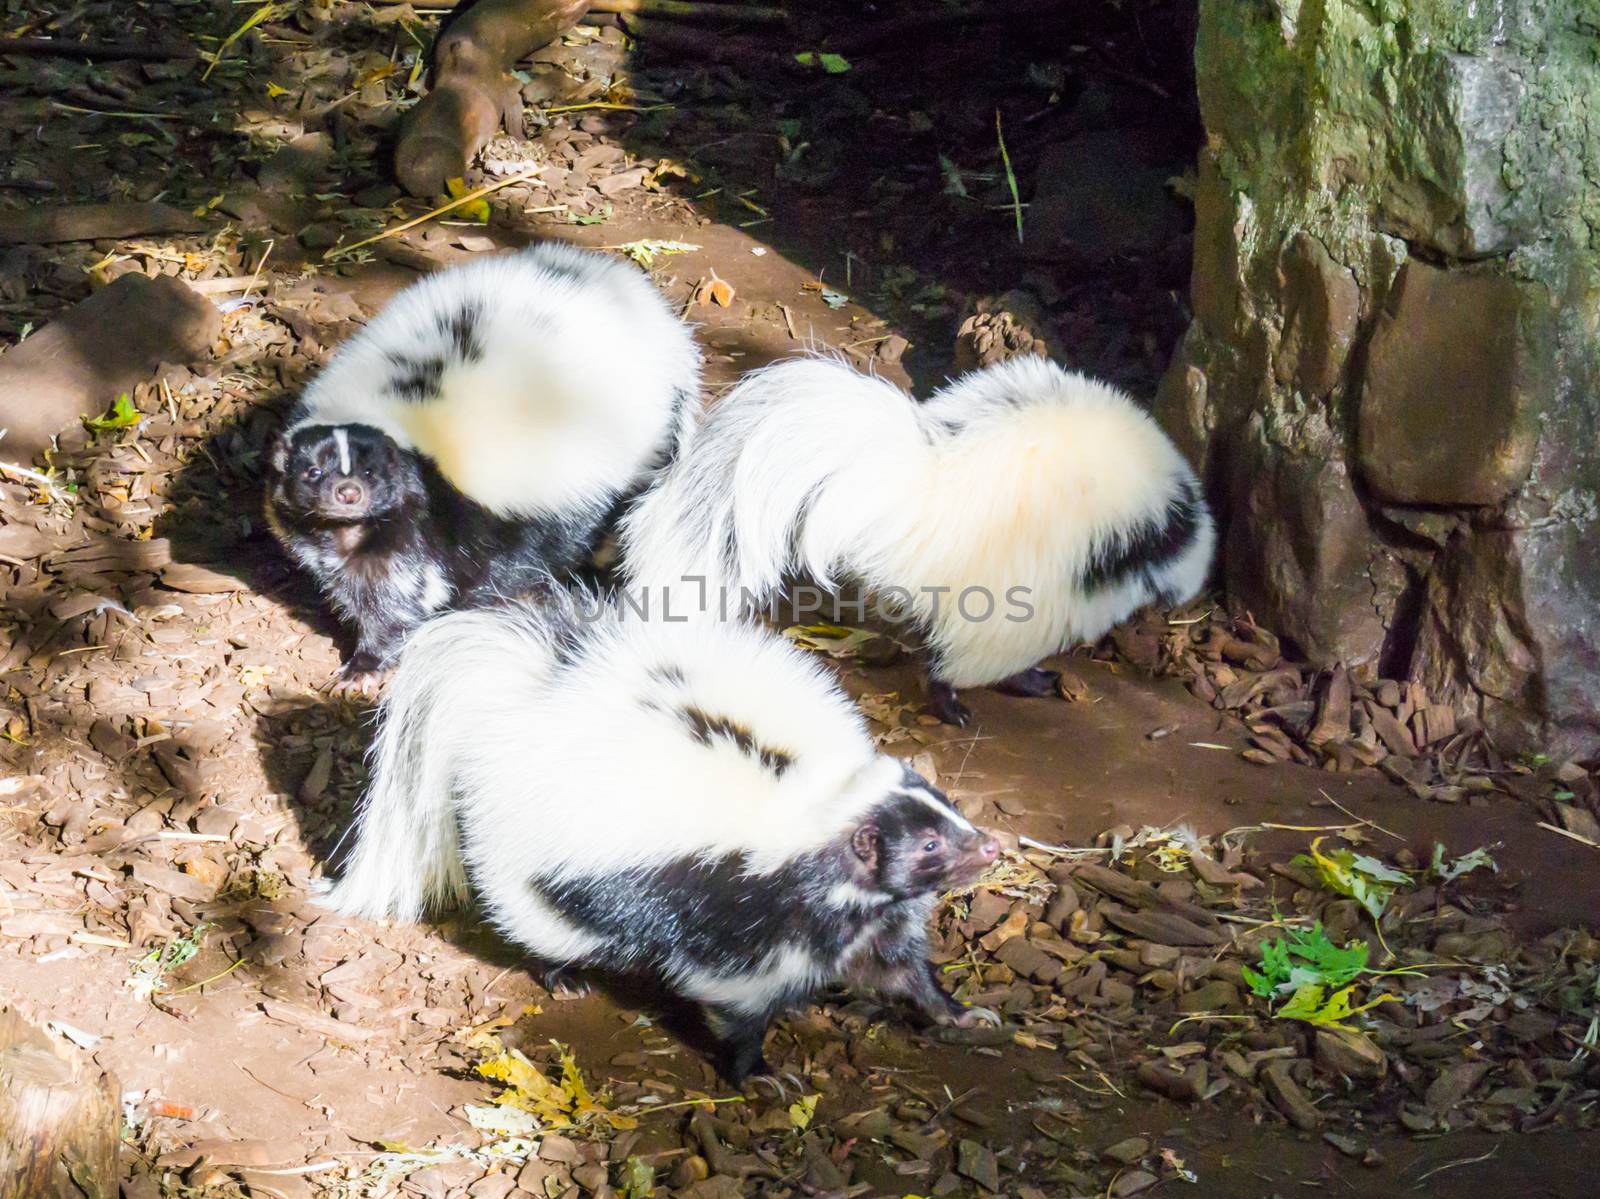 family of black and white common striped skunks standing together wild animals from canada by charlottebleijenberg